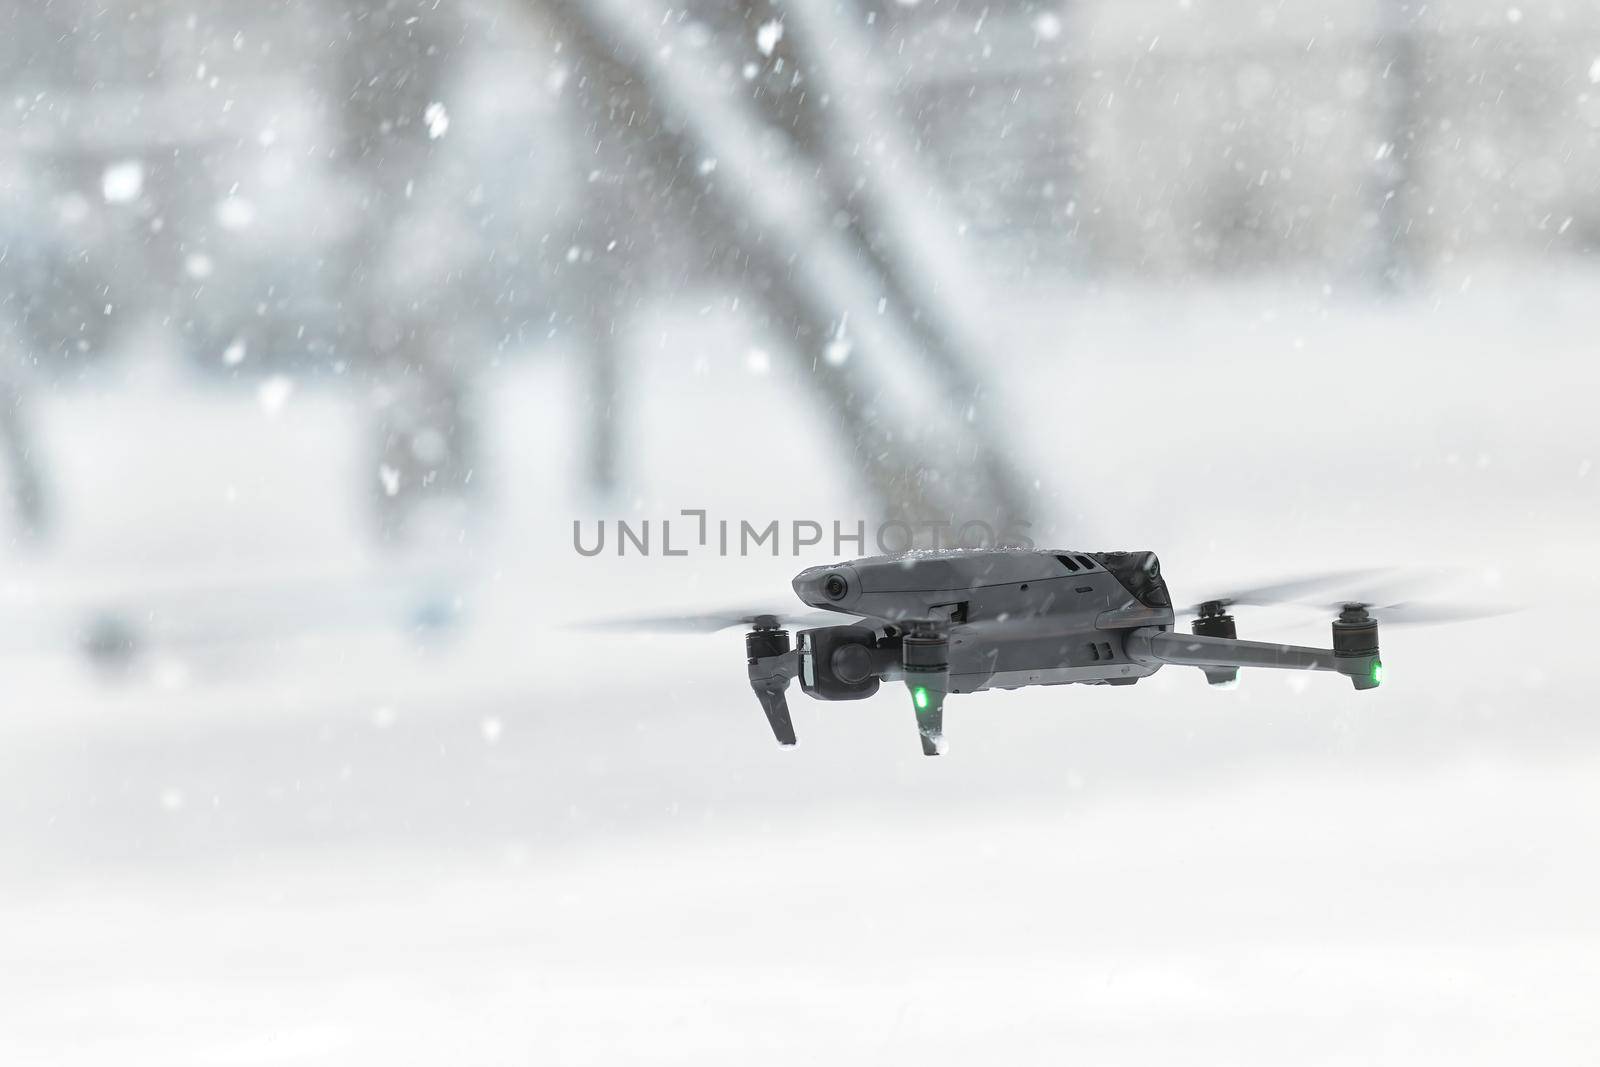 New DJI Mavic 3, flying in snow conditions. DJI Mavic 3 one of the most portable drones in the market, with Hasselblad camera. 25.01.2022 Rostov-on-Don, Russia by EvgeniyQW